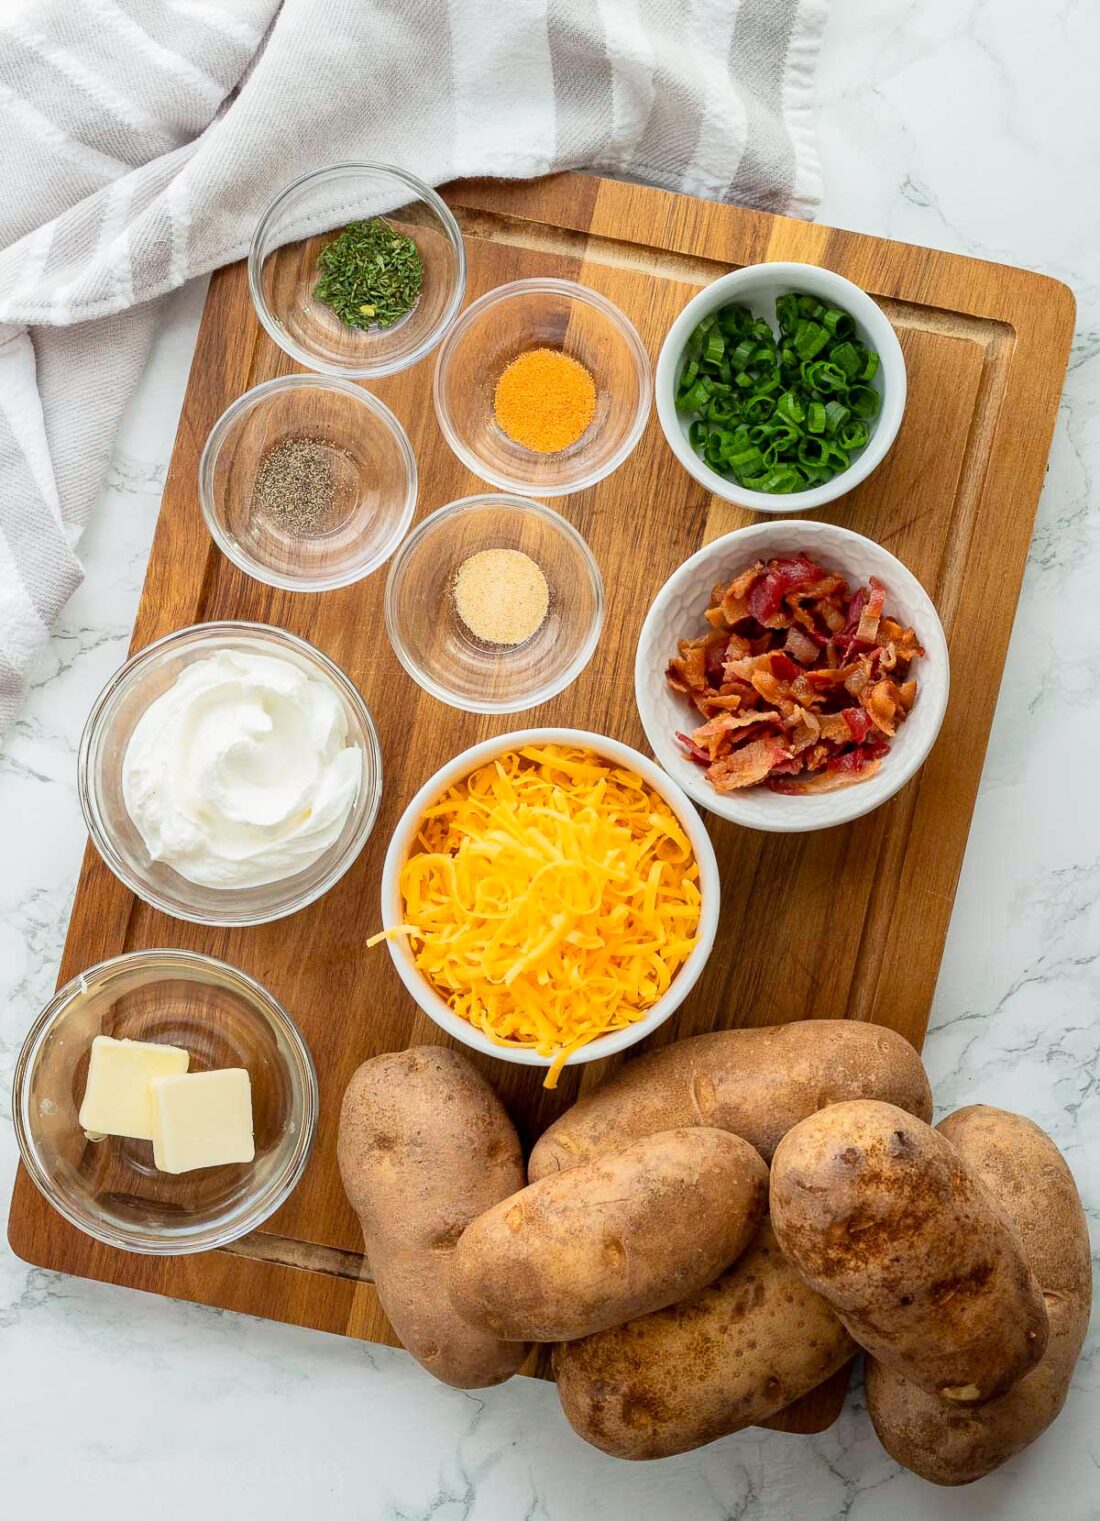 Ingredients for crispy baked potato skins on wooden cutting board.